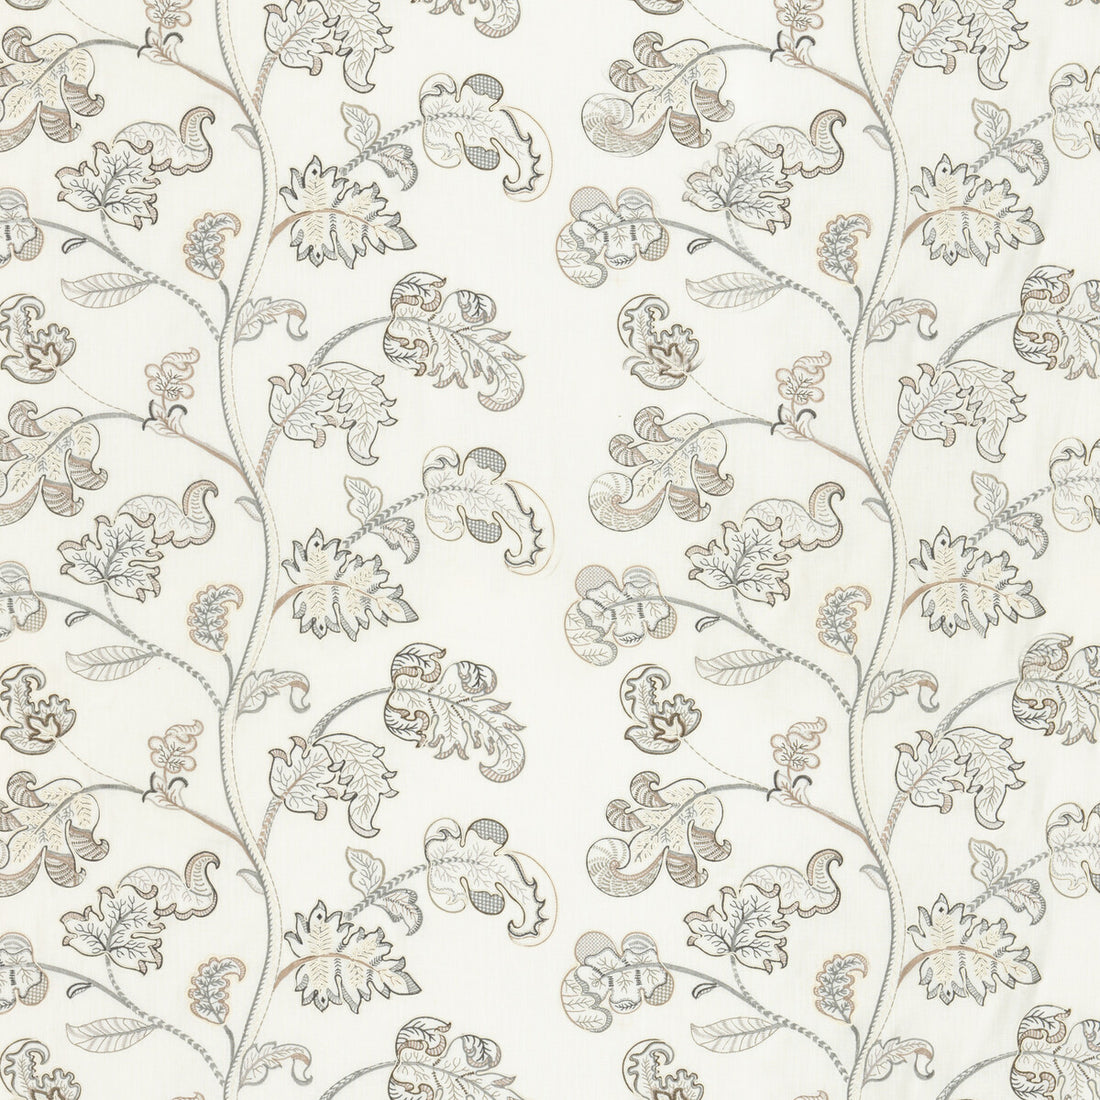 Alderwood fabric in ivory/stone color - pattern BF10769.1.0 - by G P &amp; J Baker in the Keswick Embroideries collection